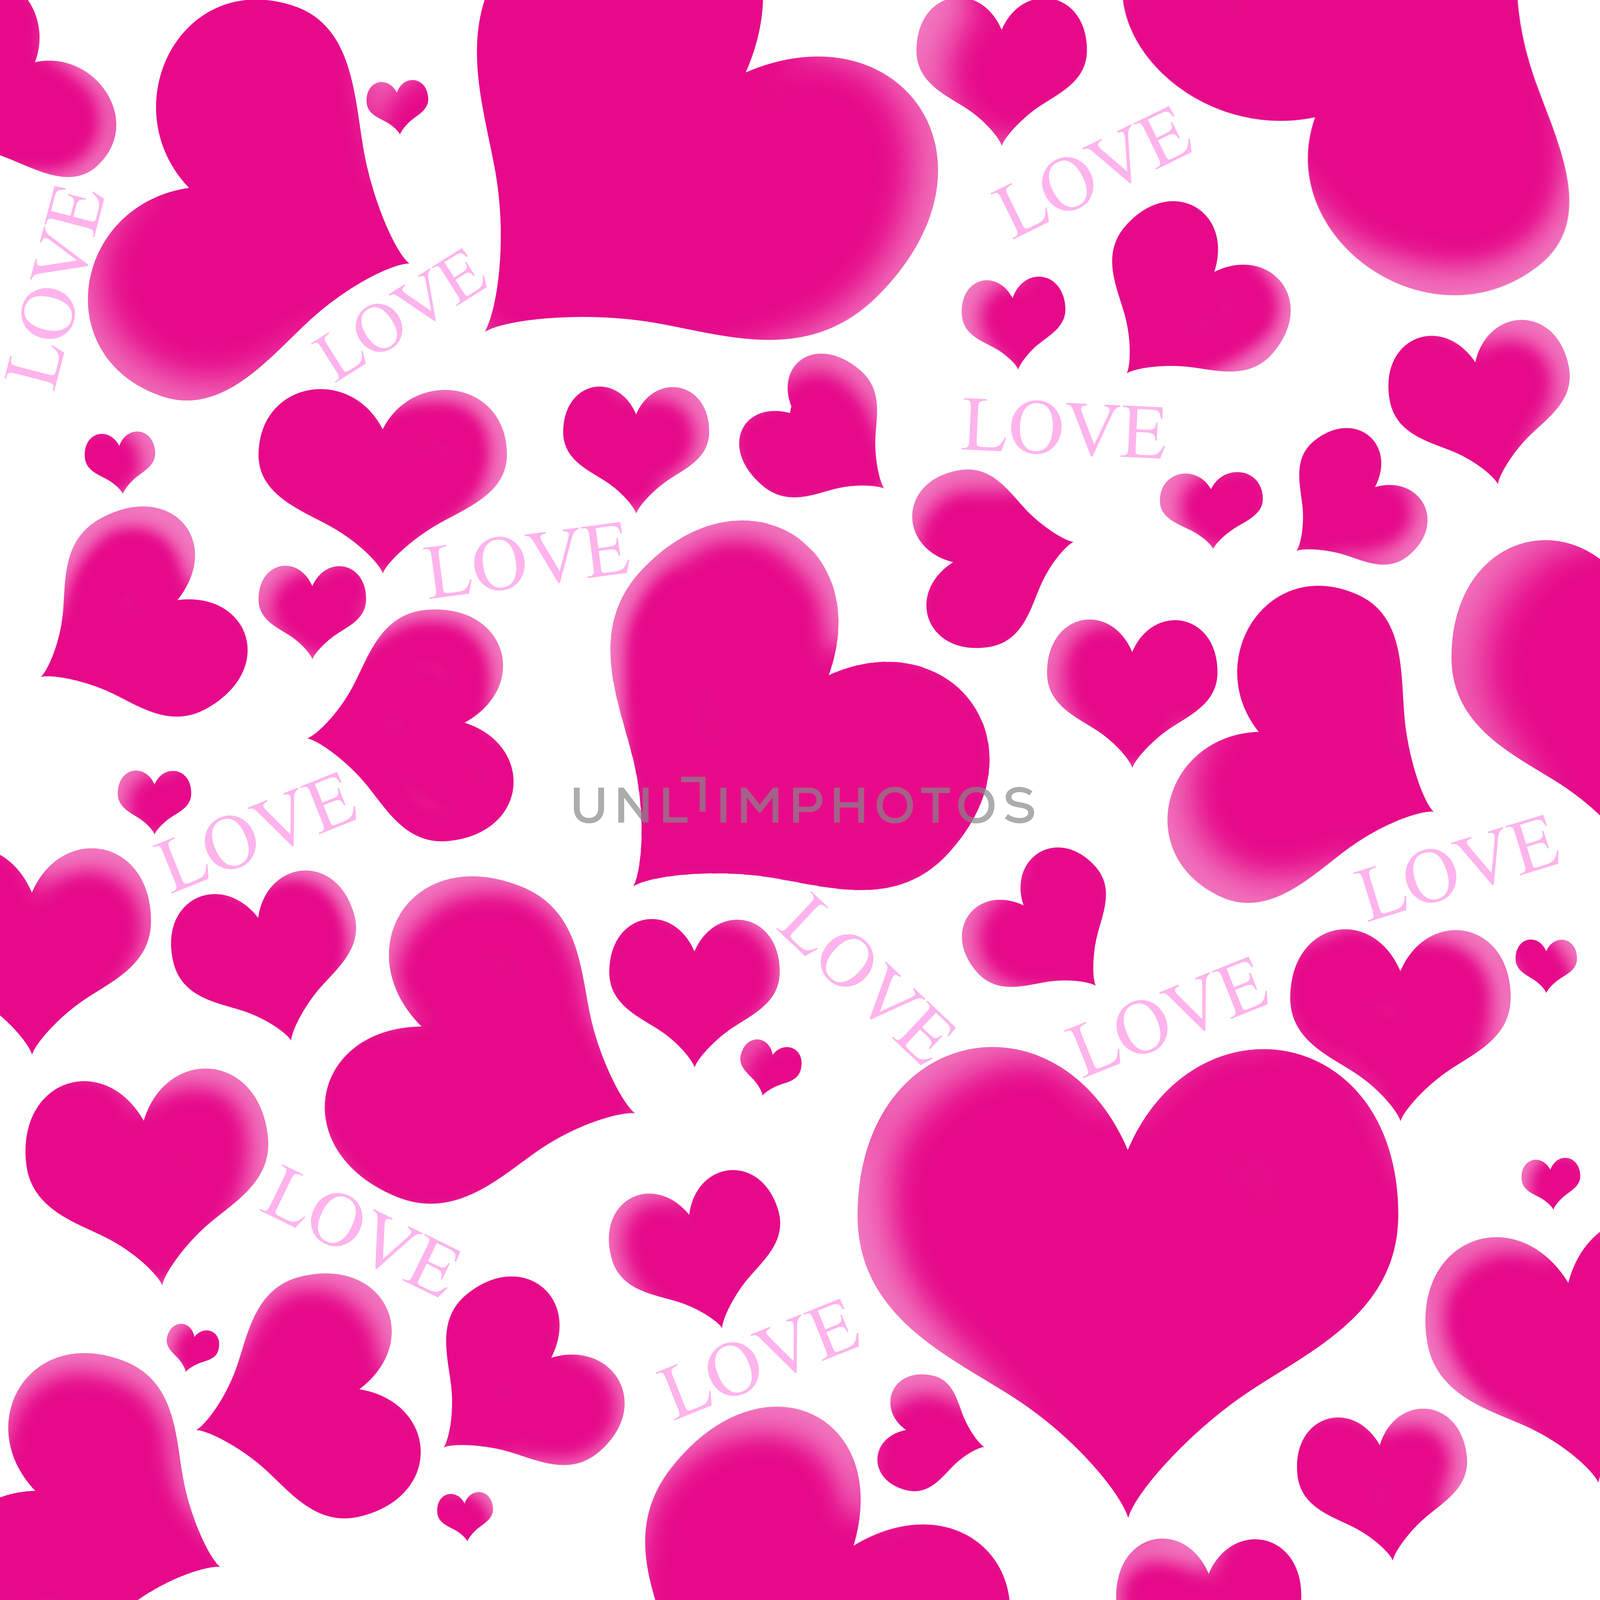 Pink hearts and LOVE wording on the white background